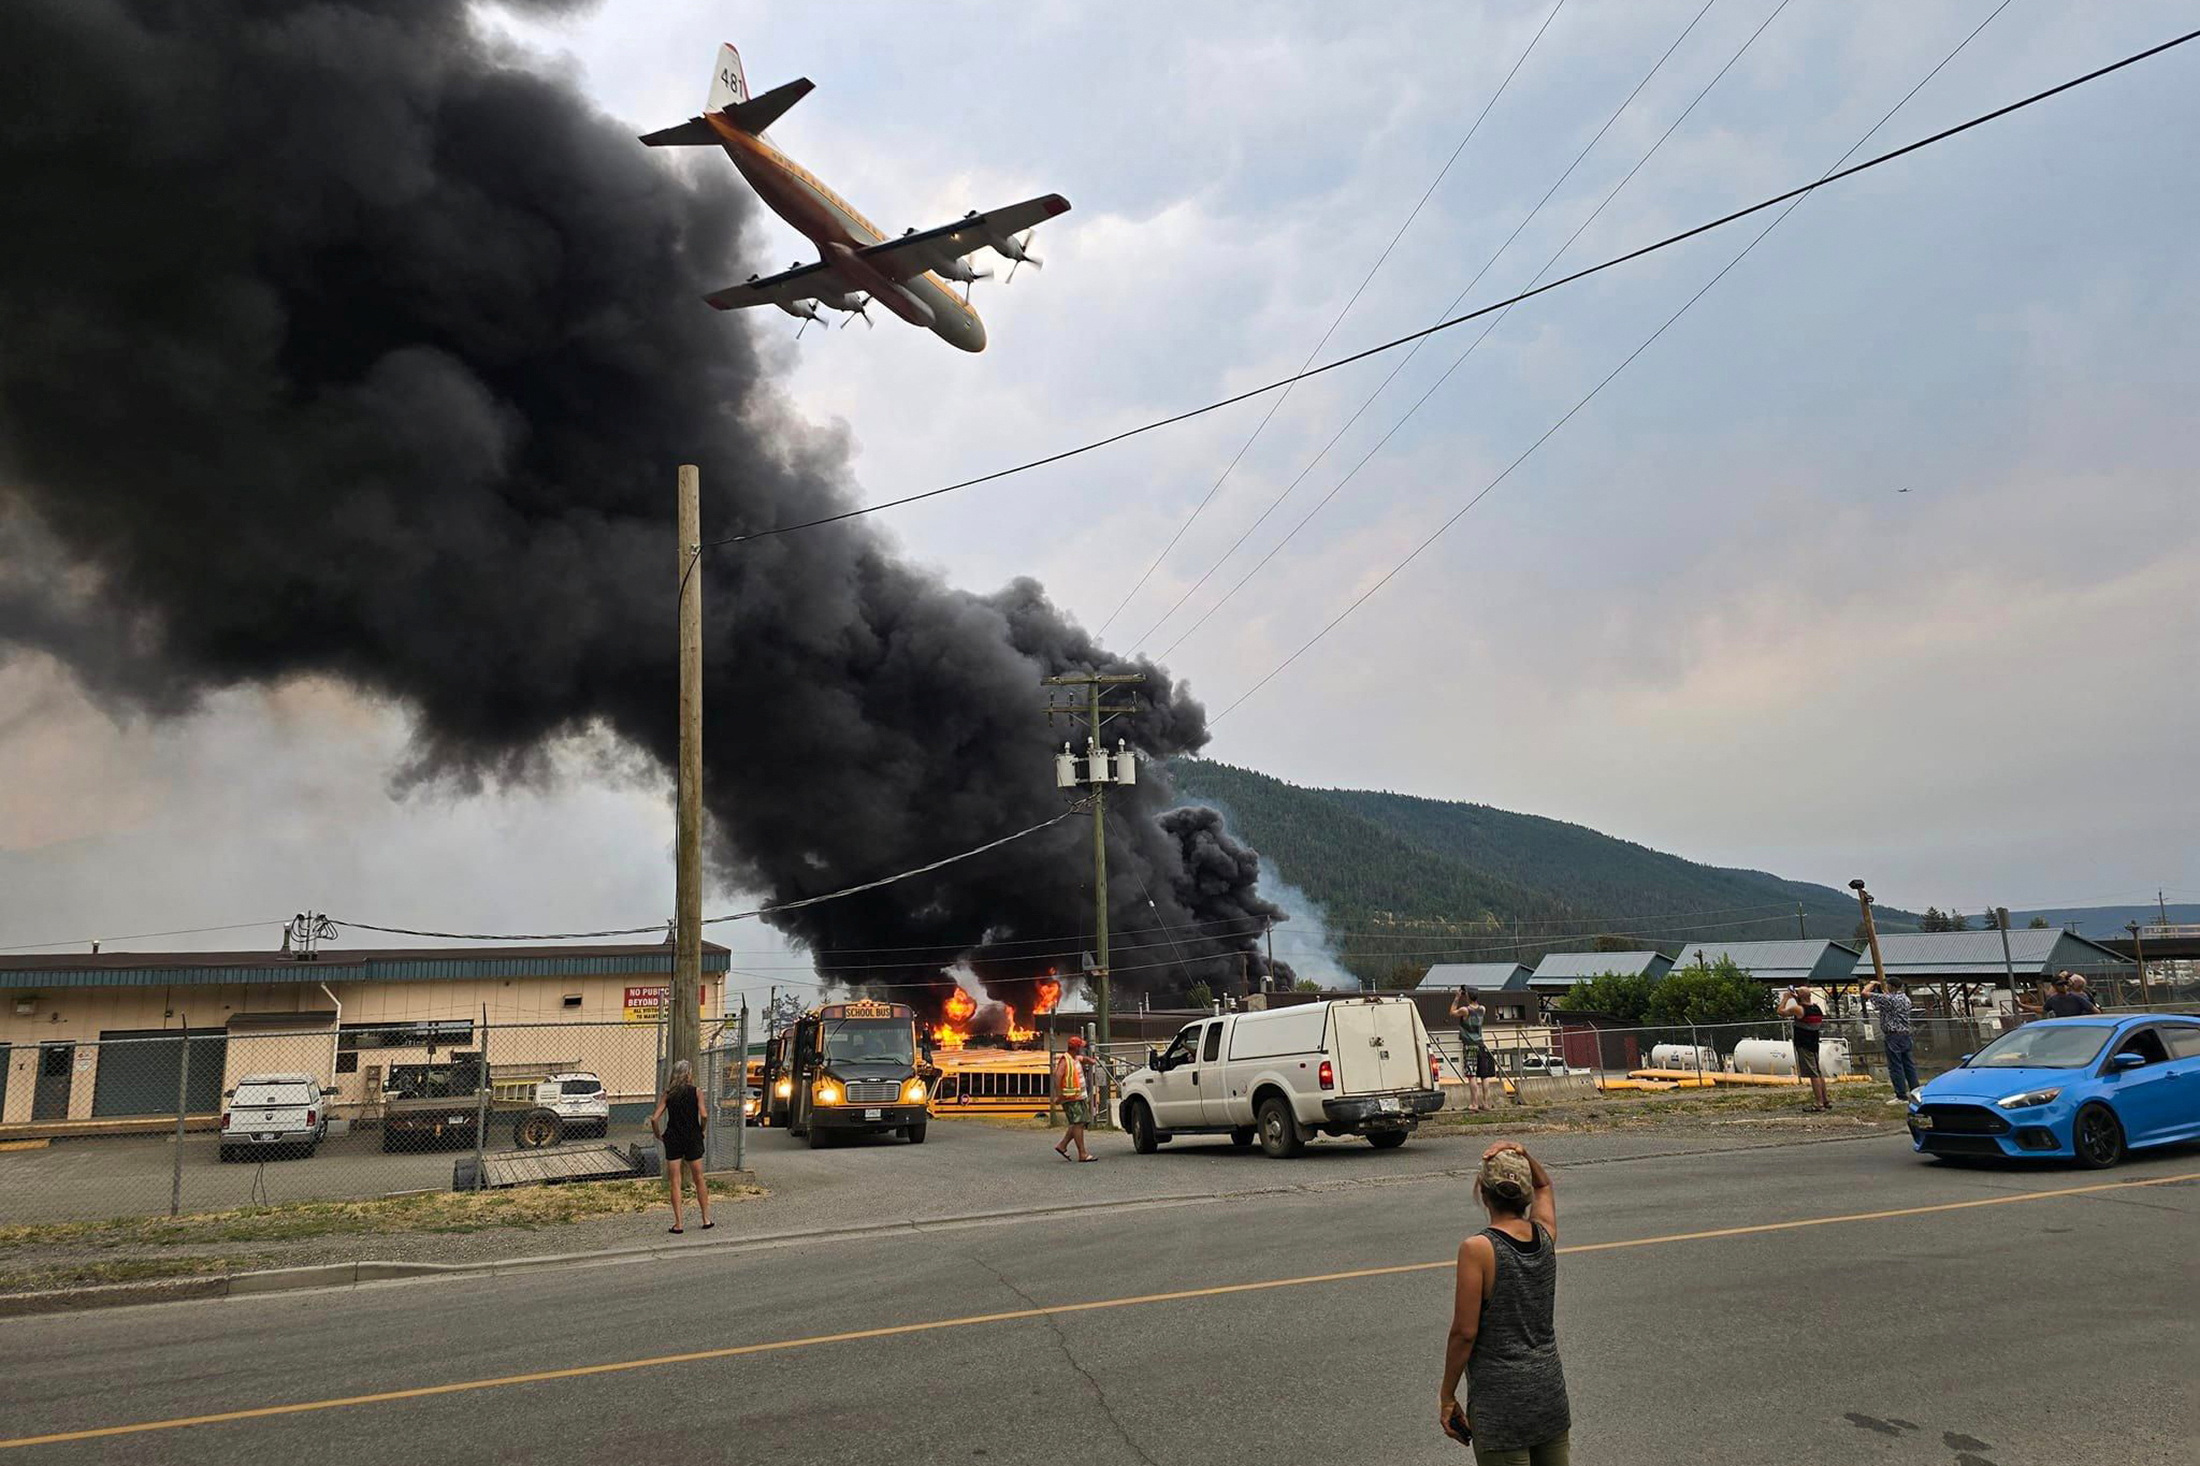 An air tanker flies low over a wildfire burning on the edge of the Cariboo region city of Williams Lake